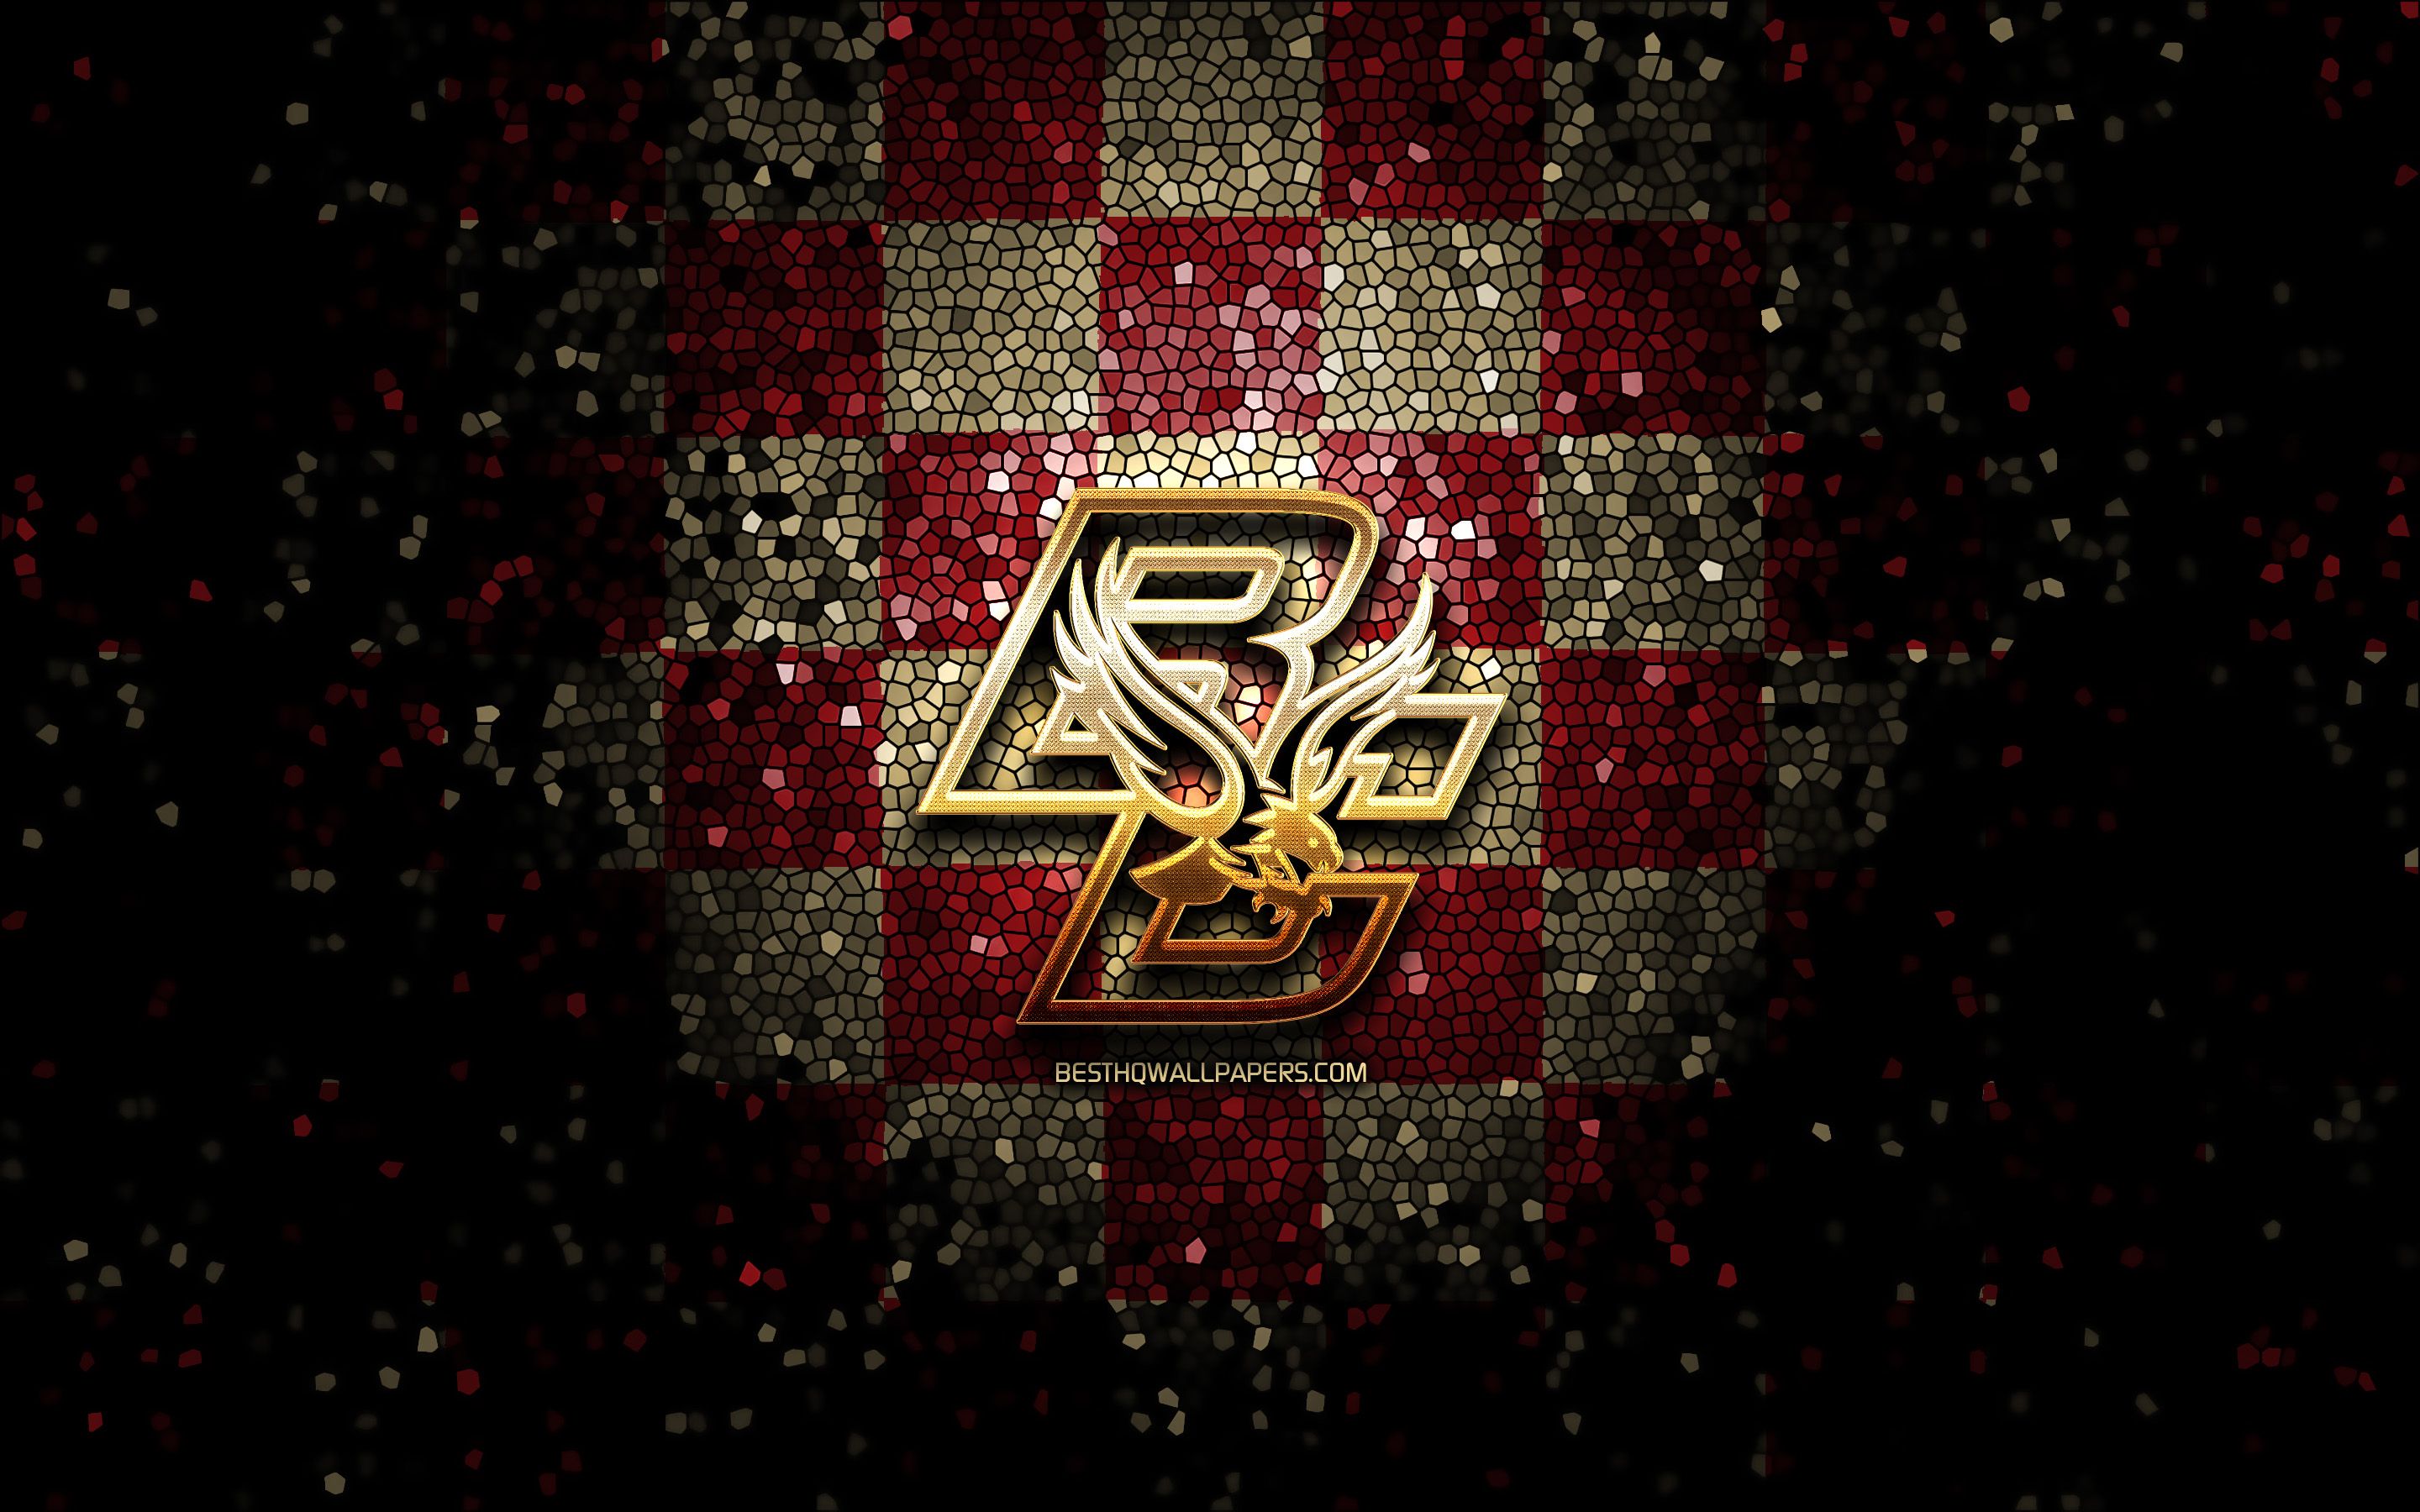 Download wallpaper Boston College Eagles, glitter logo, NCAA, purple brown checkered background, USA, american football team, Boston College Eagles logo, mosaic art, american football, America for desktop with resolution 2880x1800. High Quality